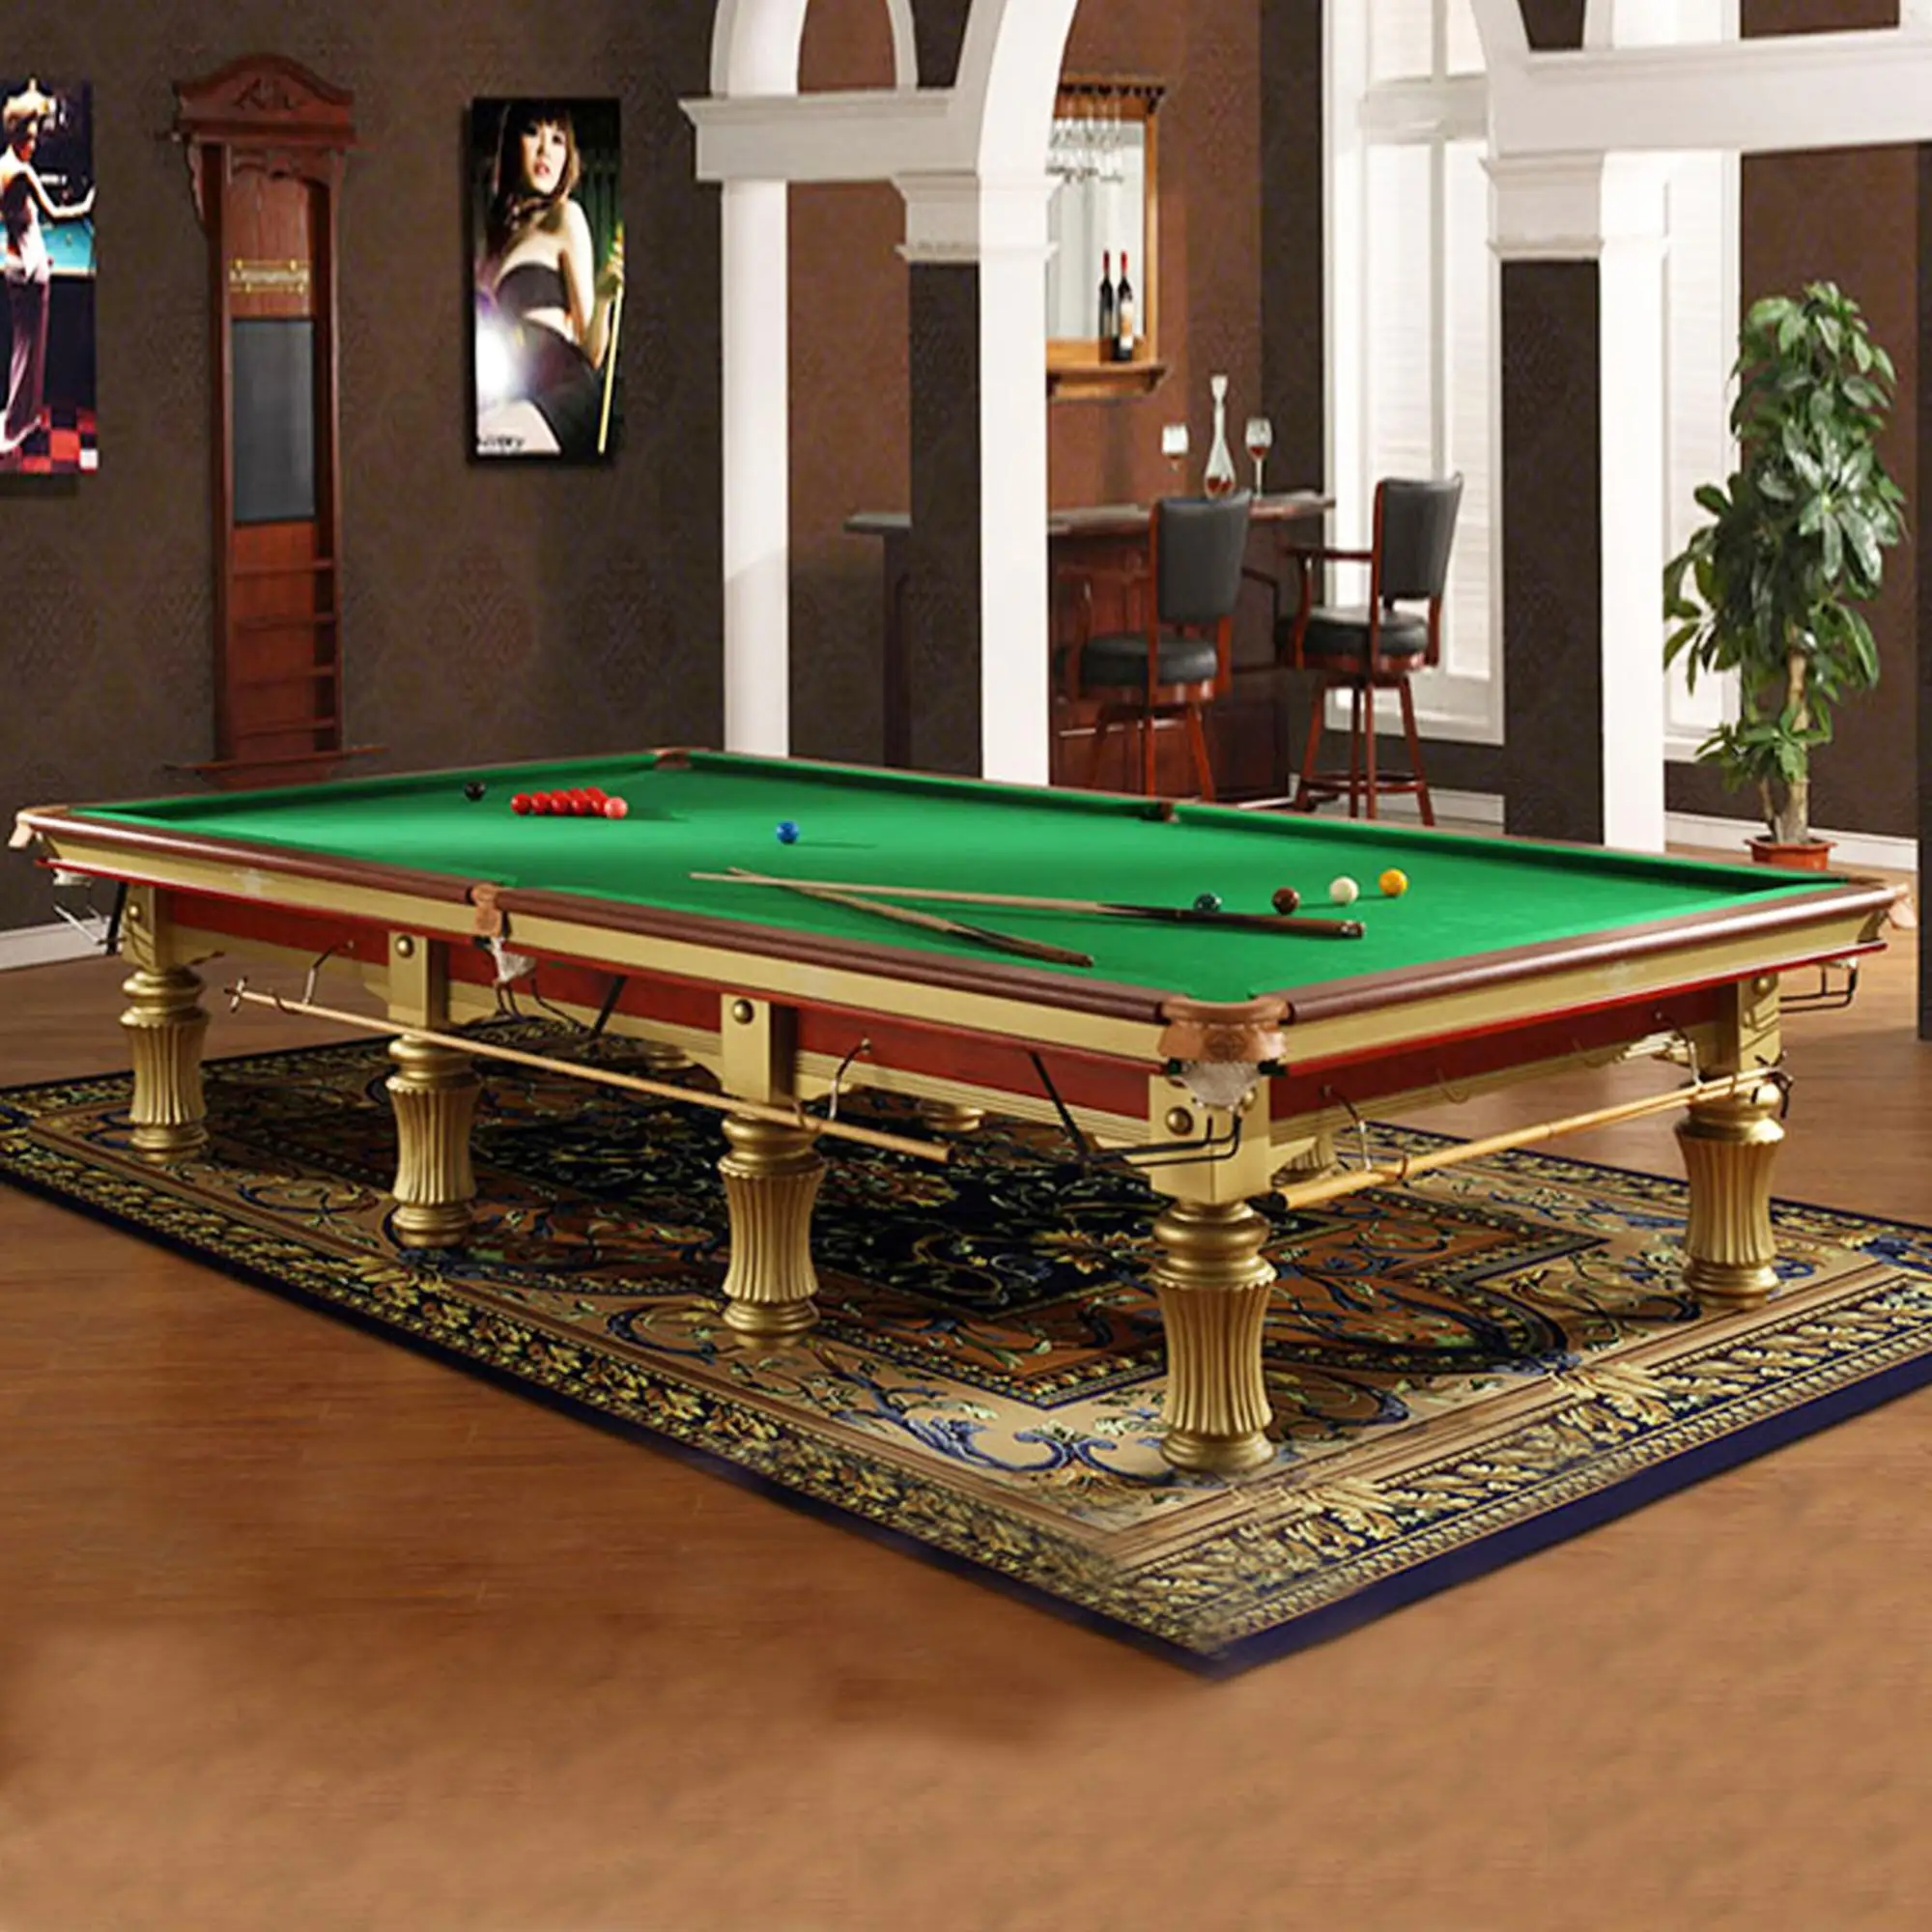 Source China factory direct snooker pool table for nepali price on m.alibaba